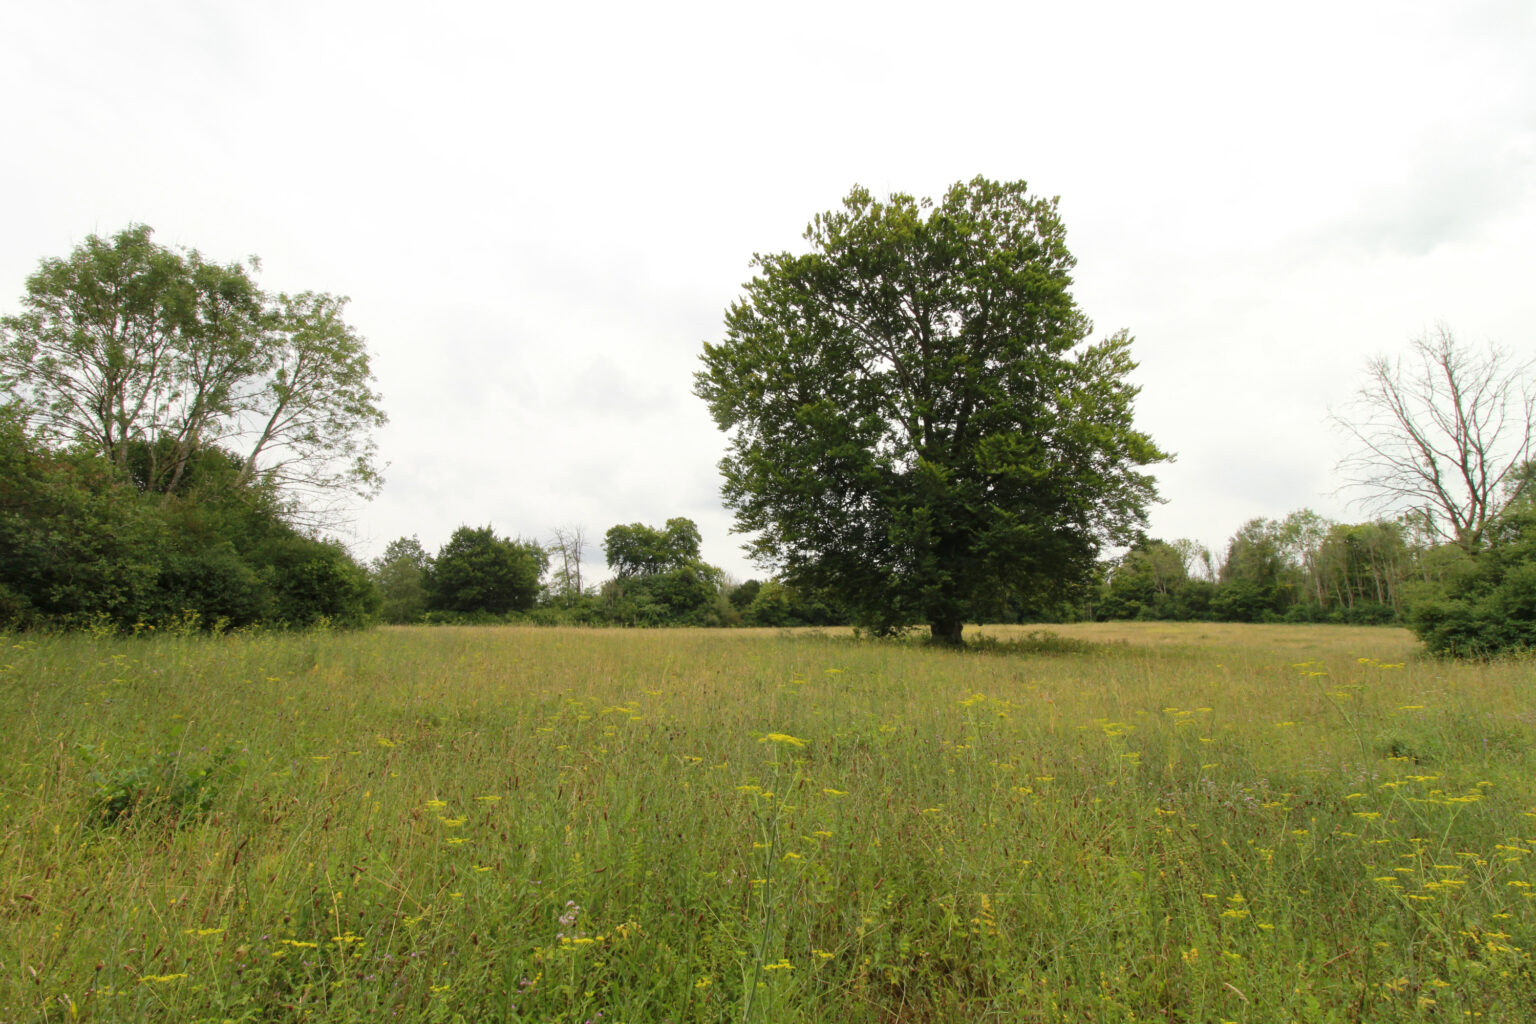 Tree in middle of meadow at Sheepleas